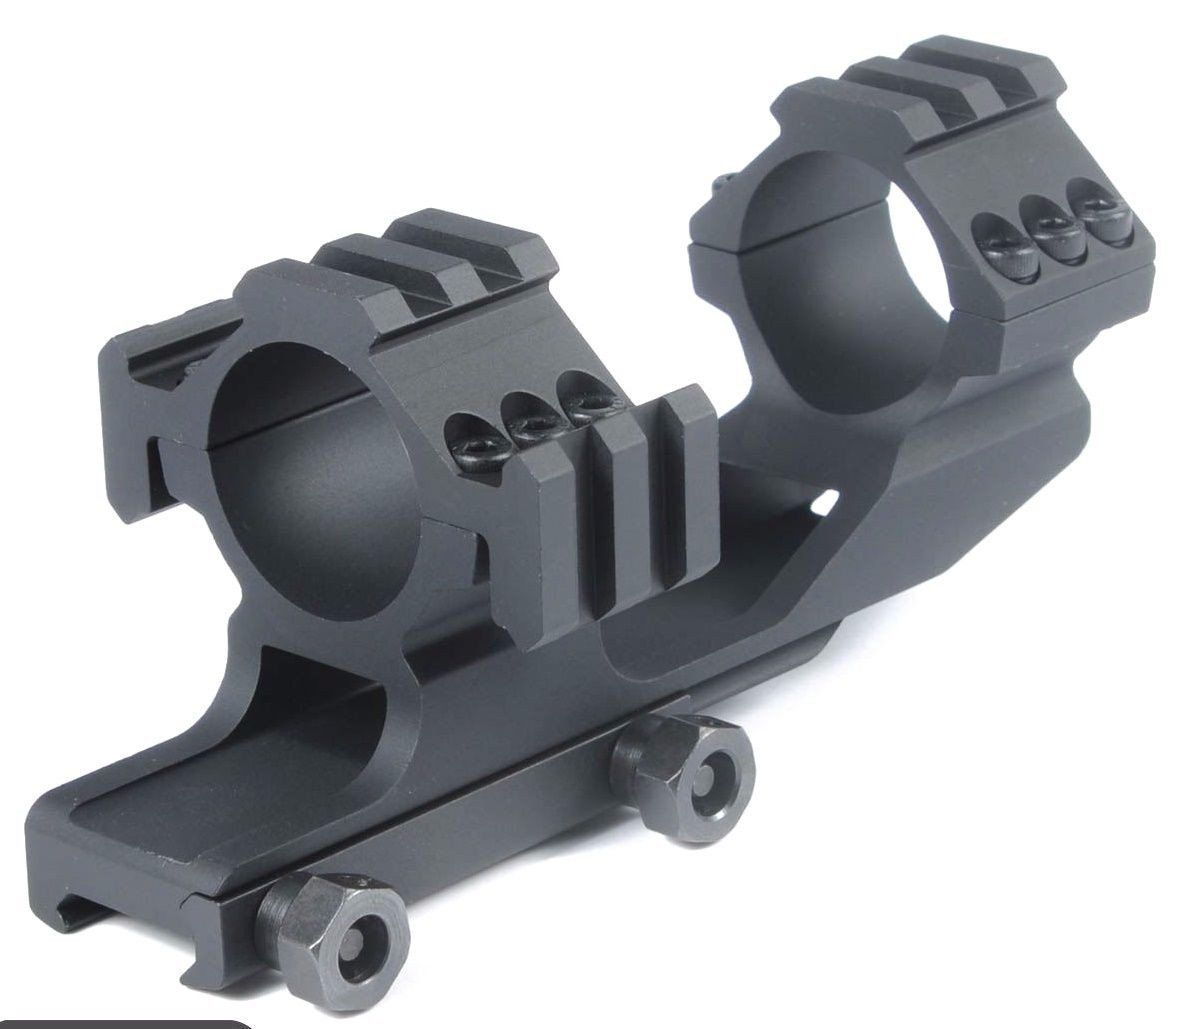 Tr-Side Rails 30mm Dual Scope Rings Cantilever Ring Scope Mount PEPR Black Scope Mounts & Accessories unbranded 